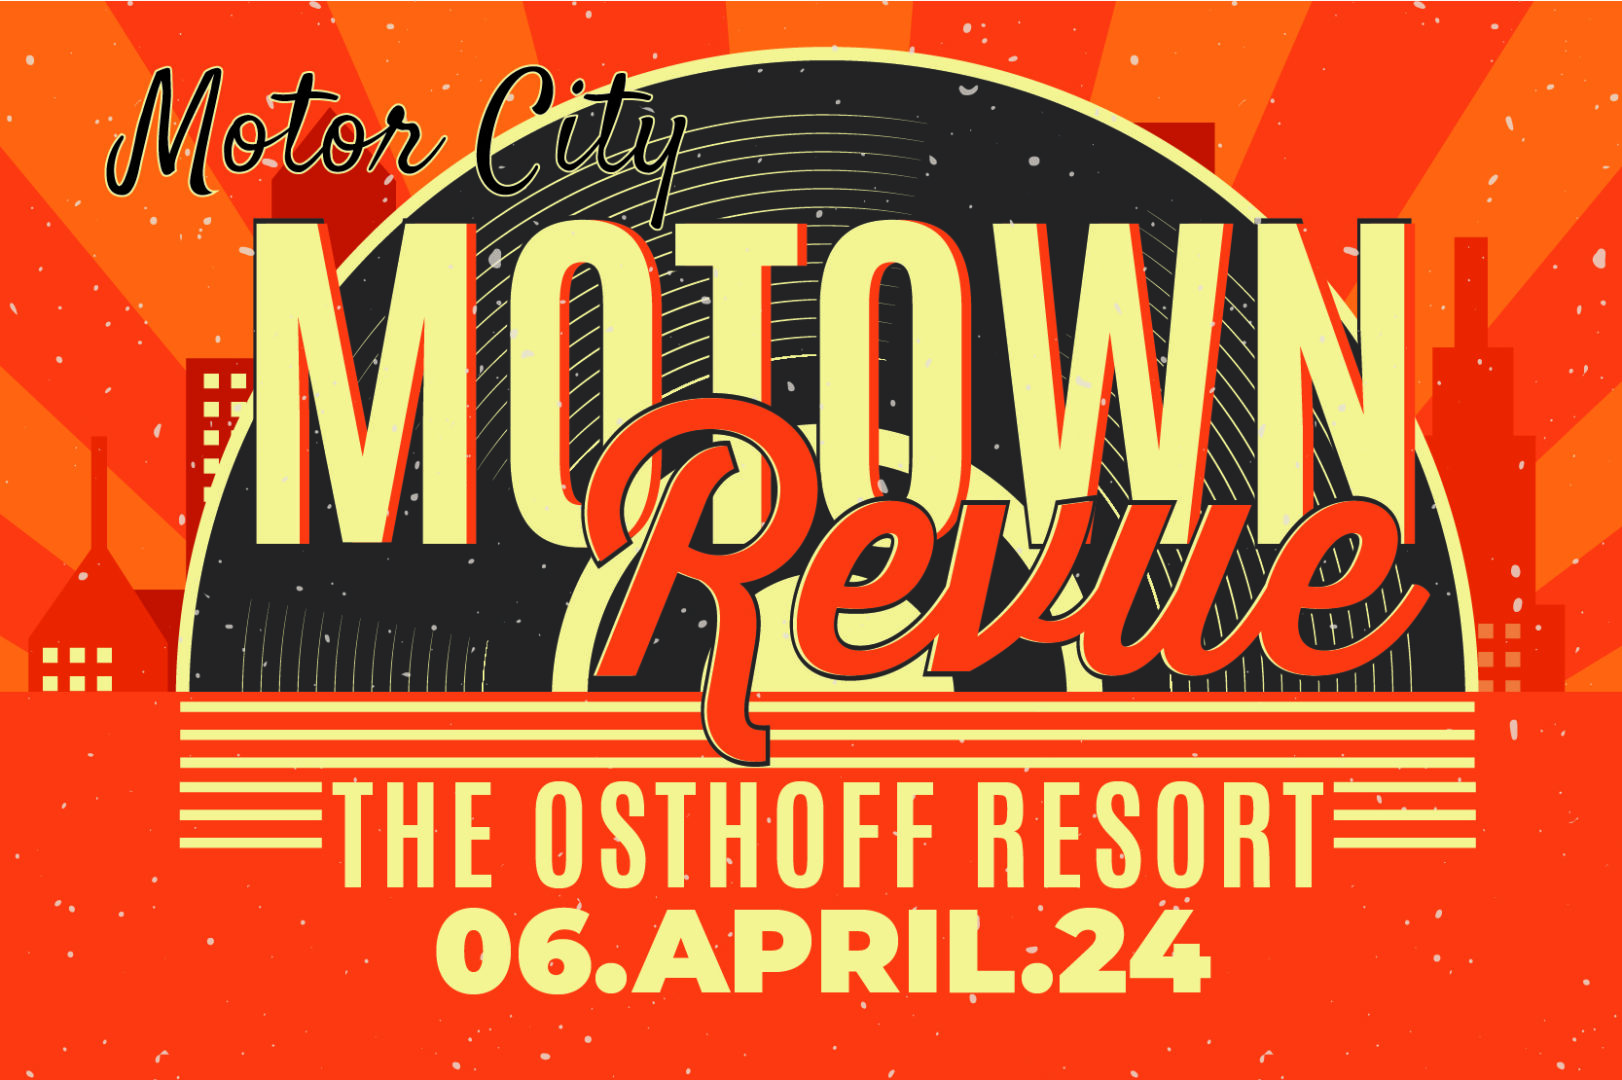 The Motown Revue | The Osthoff Resort